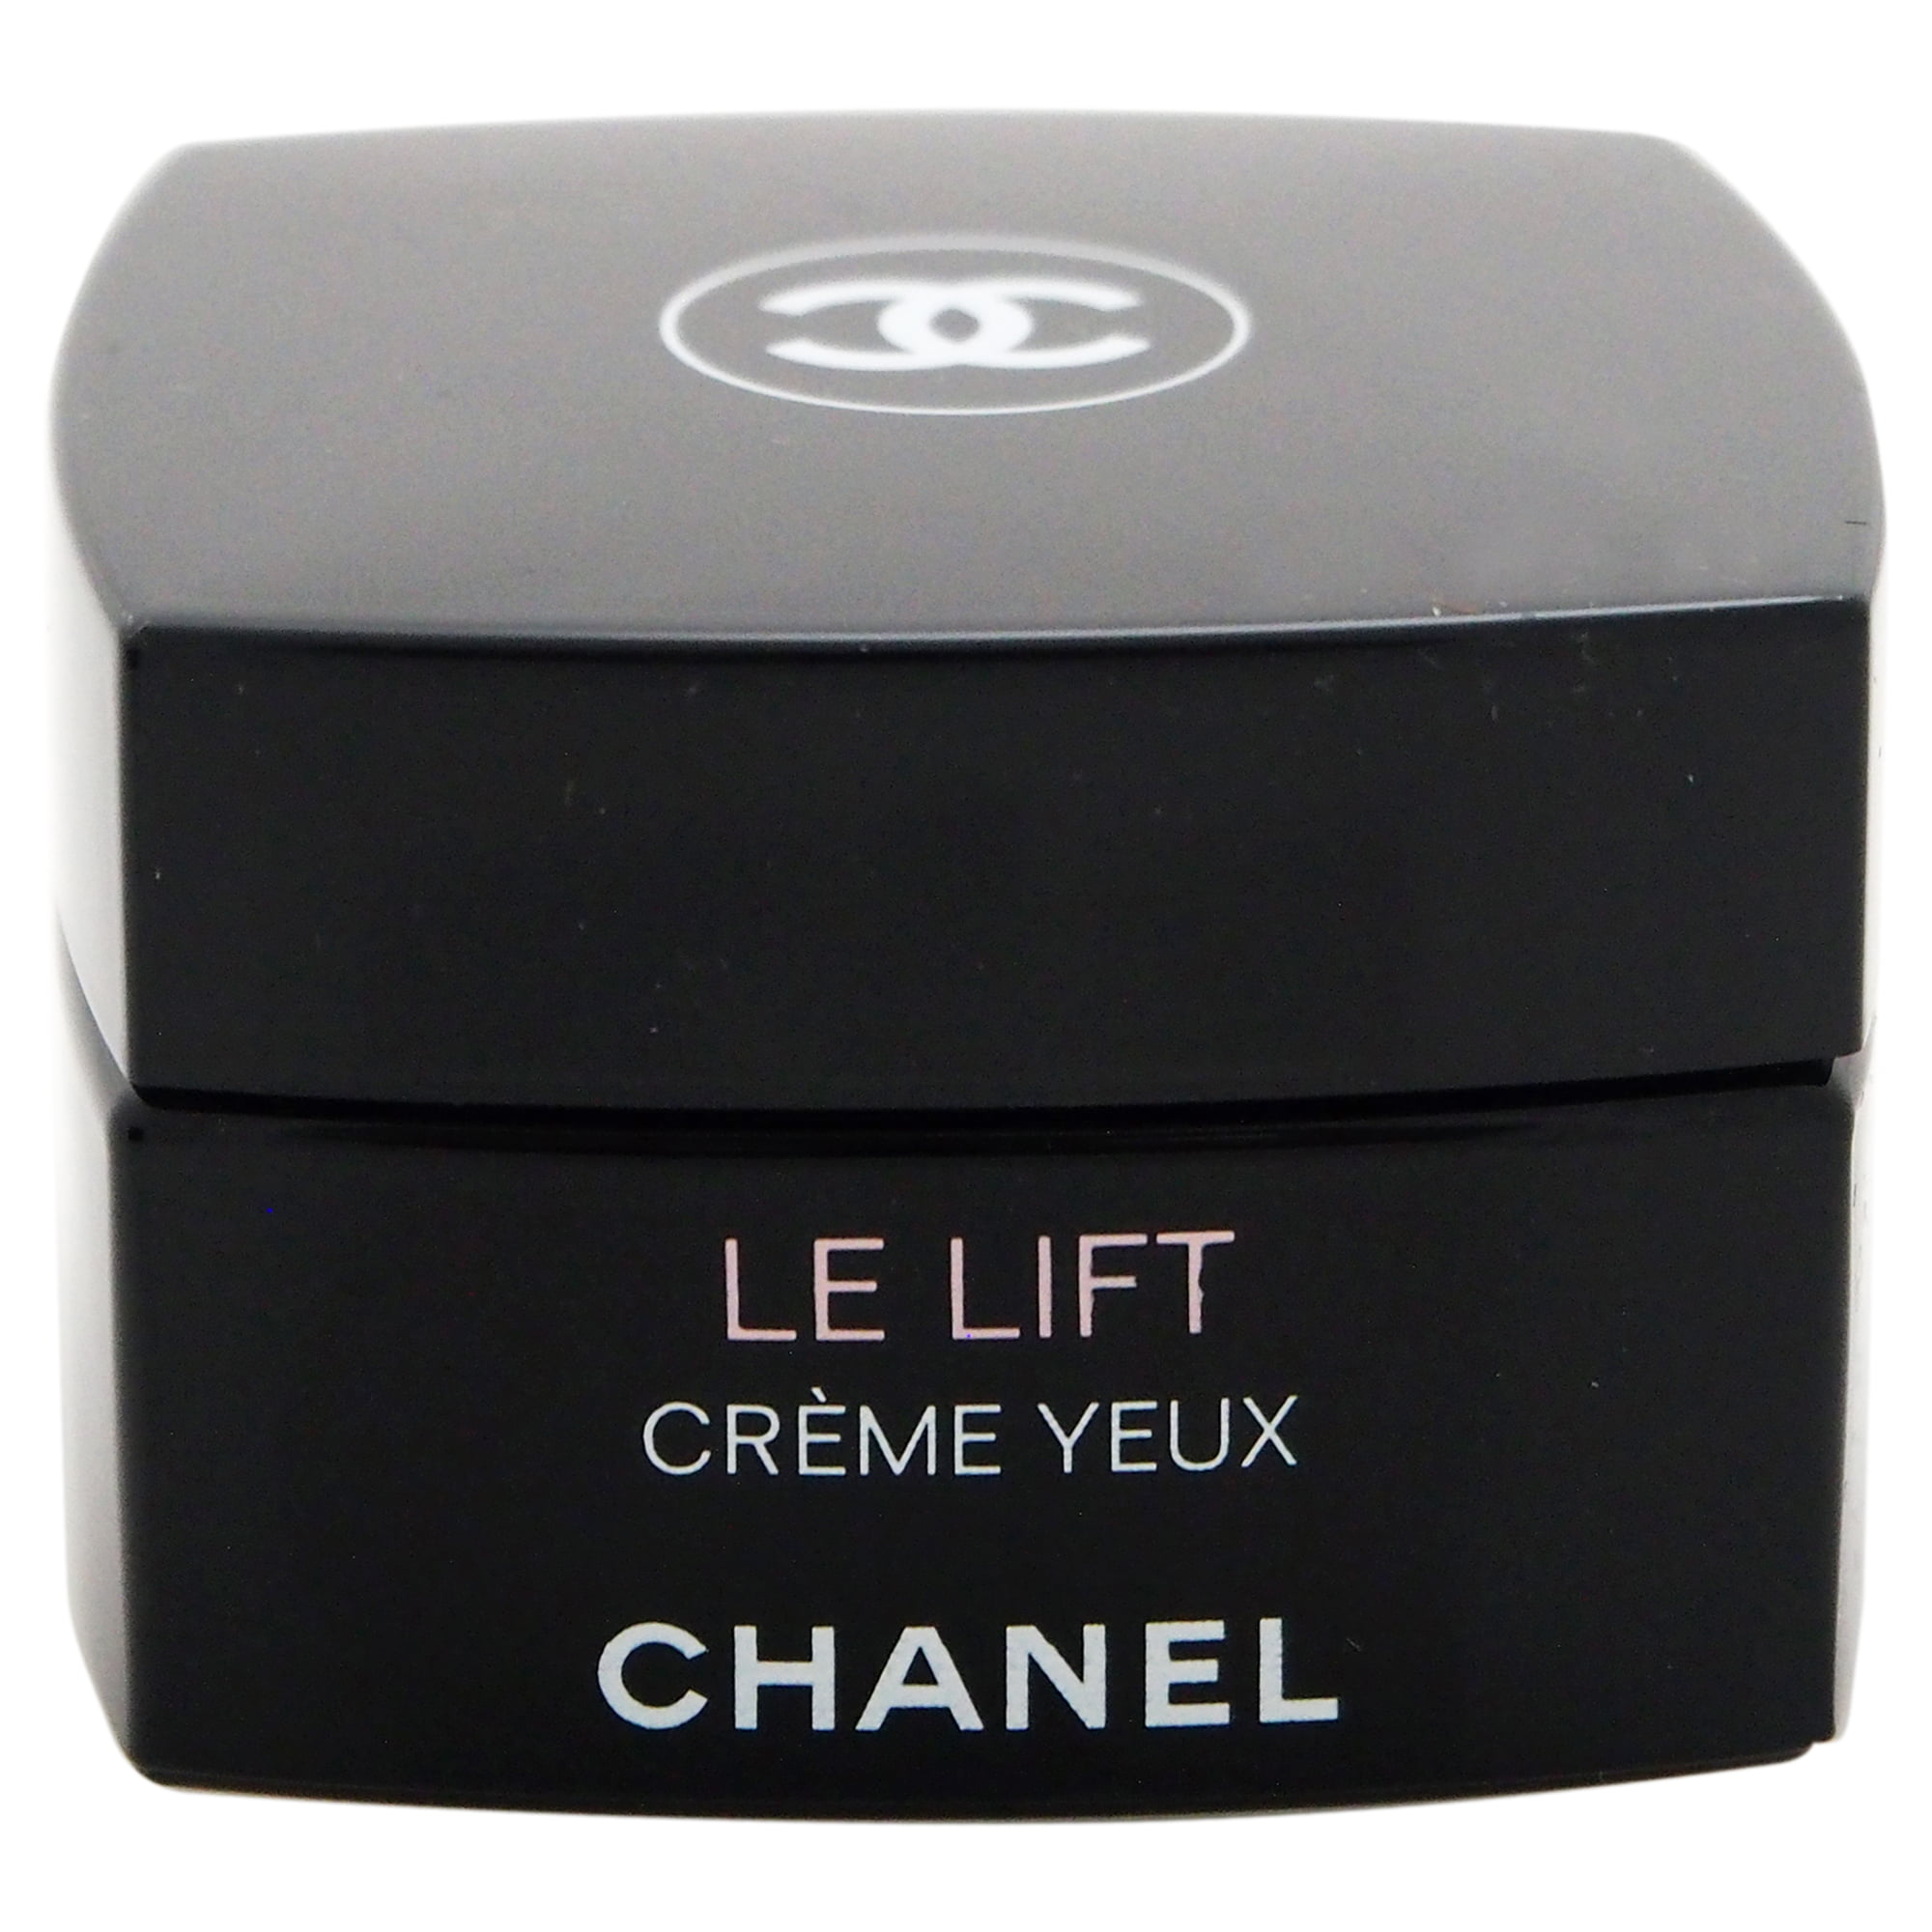 Le Lift Creme Yeux Firming Anti-Wrinkle Eye Cream by Chanel for